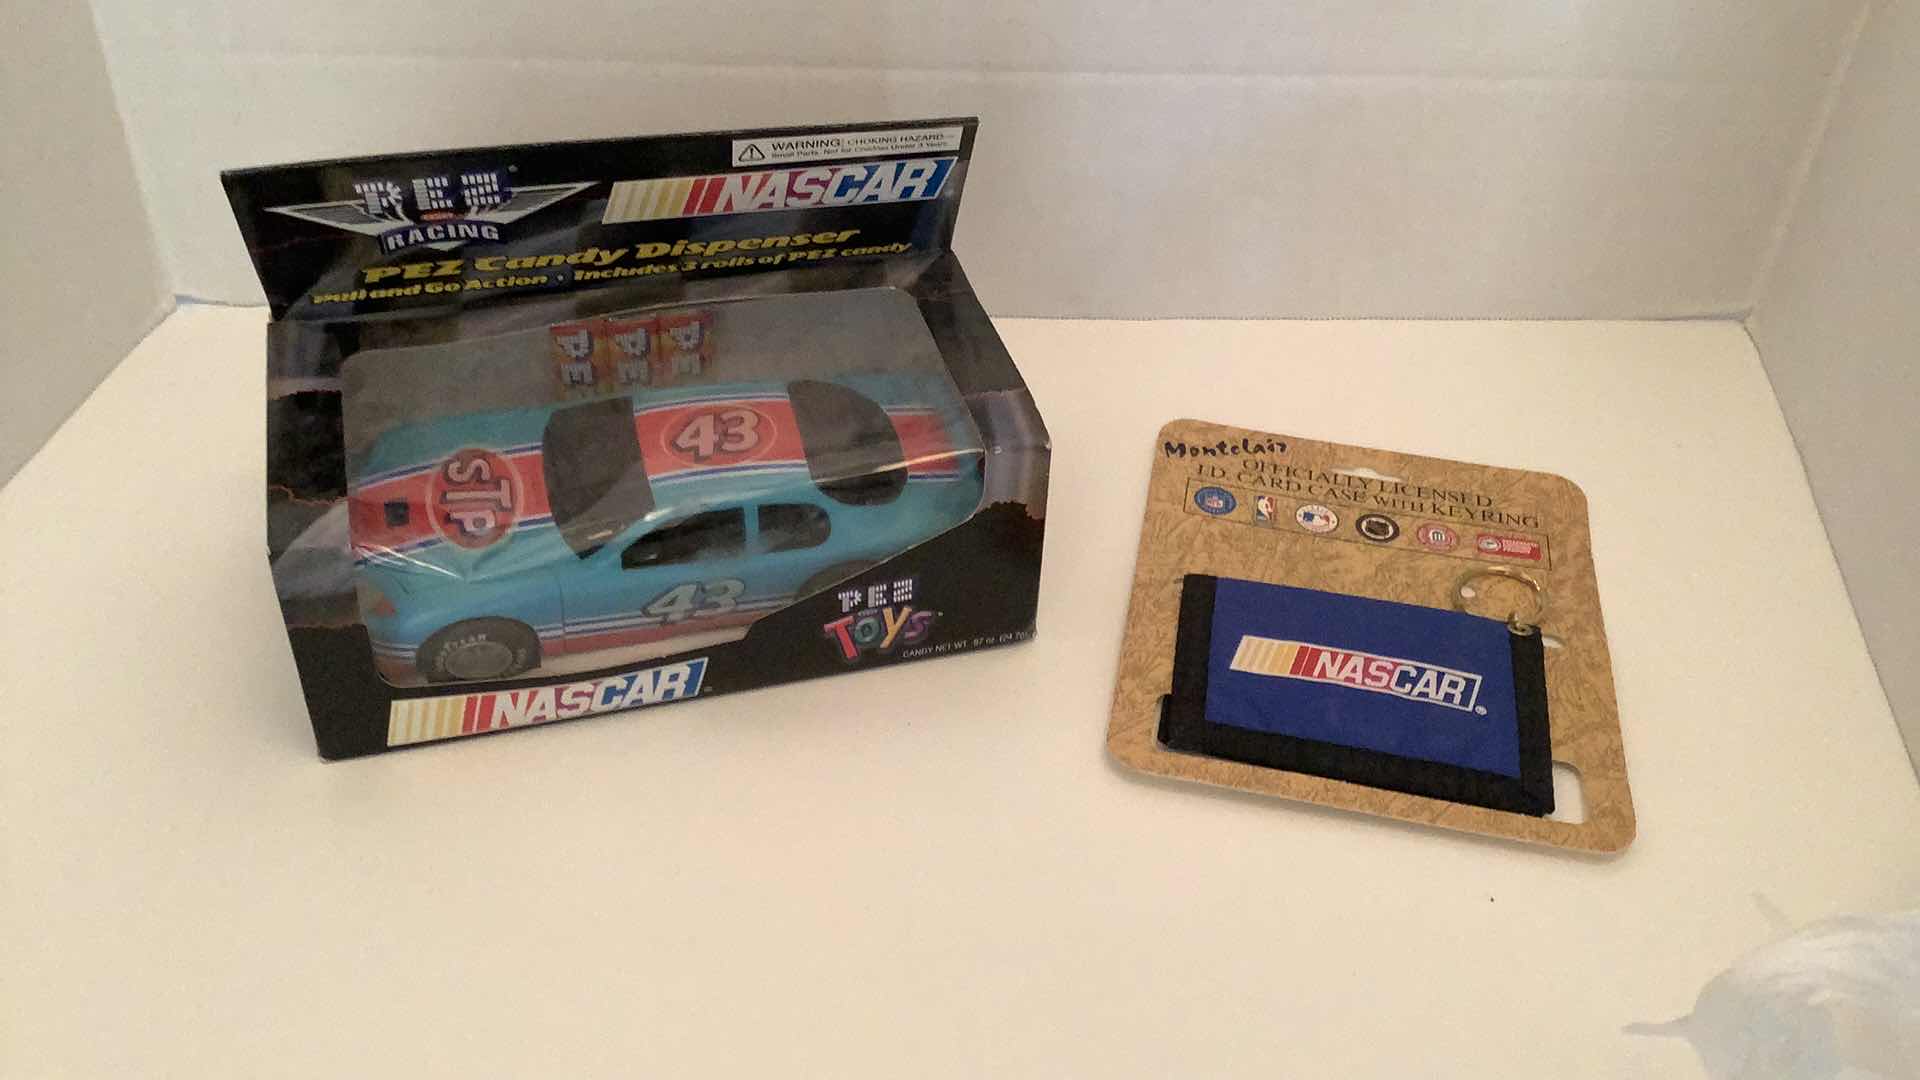 Photo 1 of NASCAR #43 PEZ CANDY DISPENSER AND CARD CASE